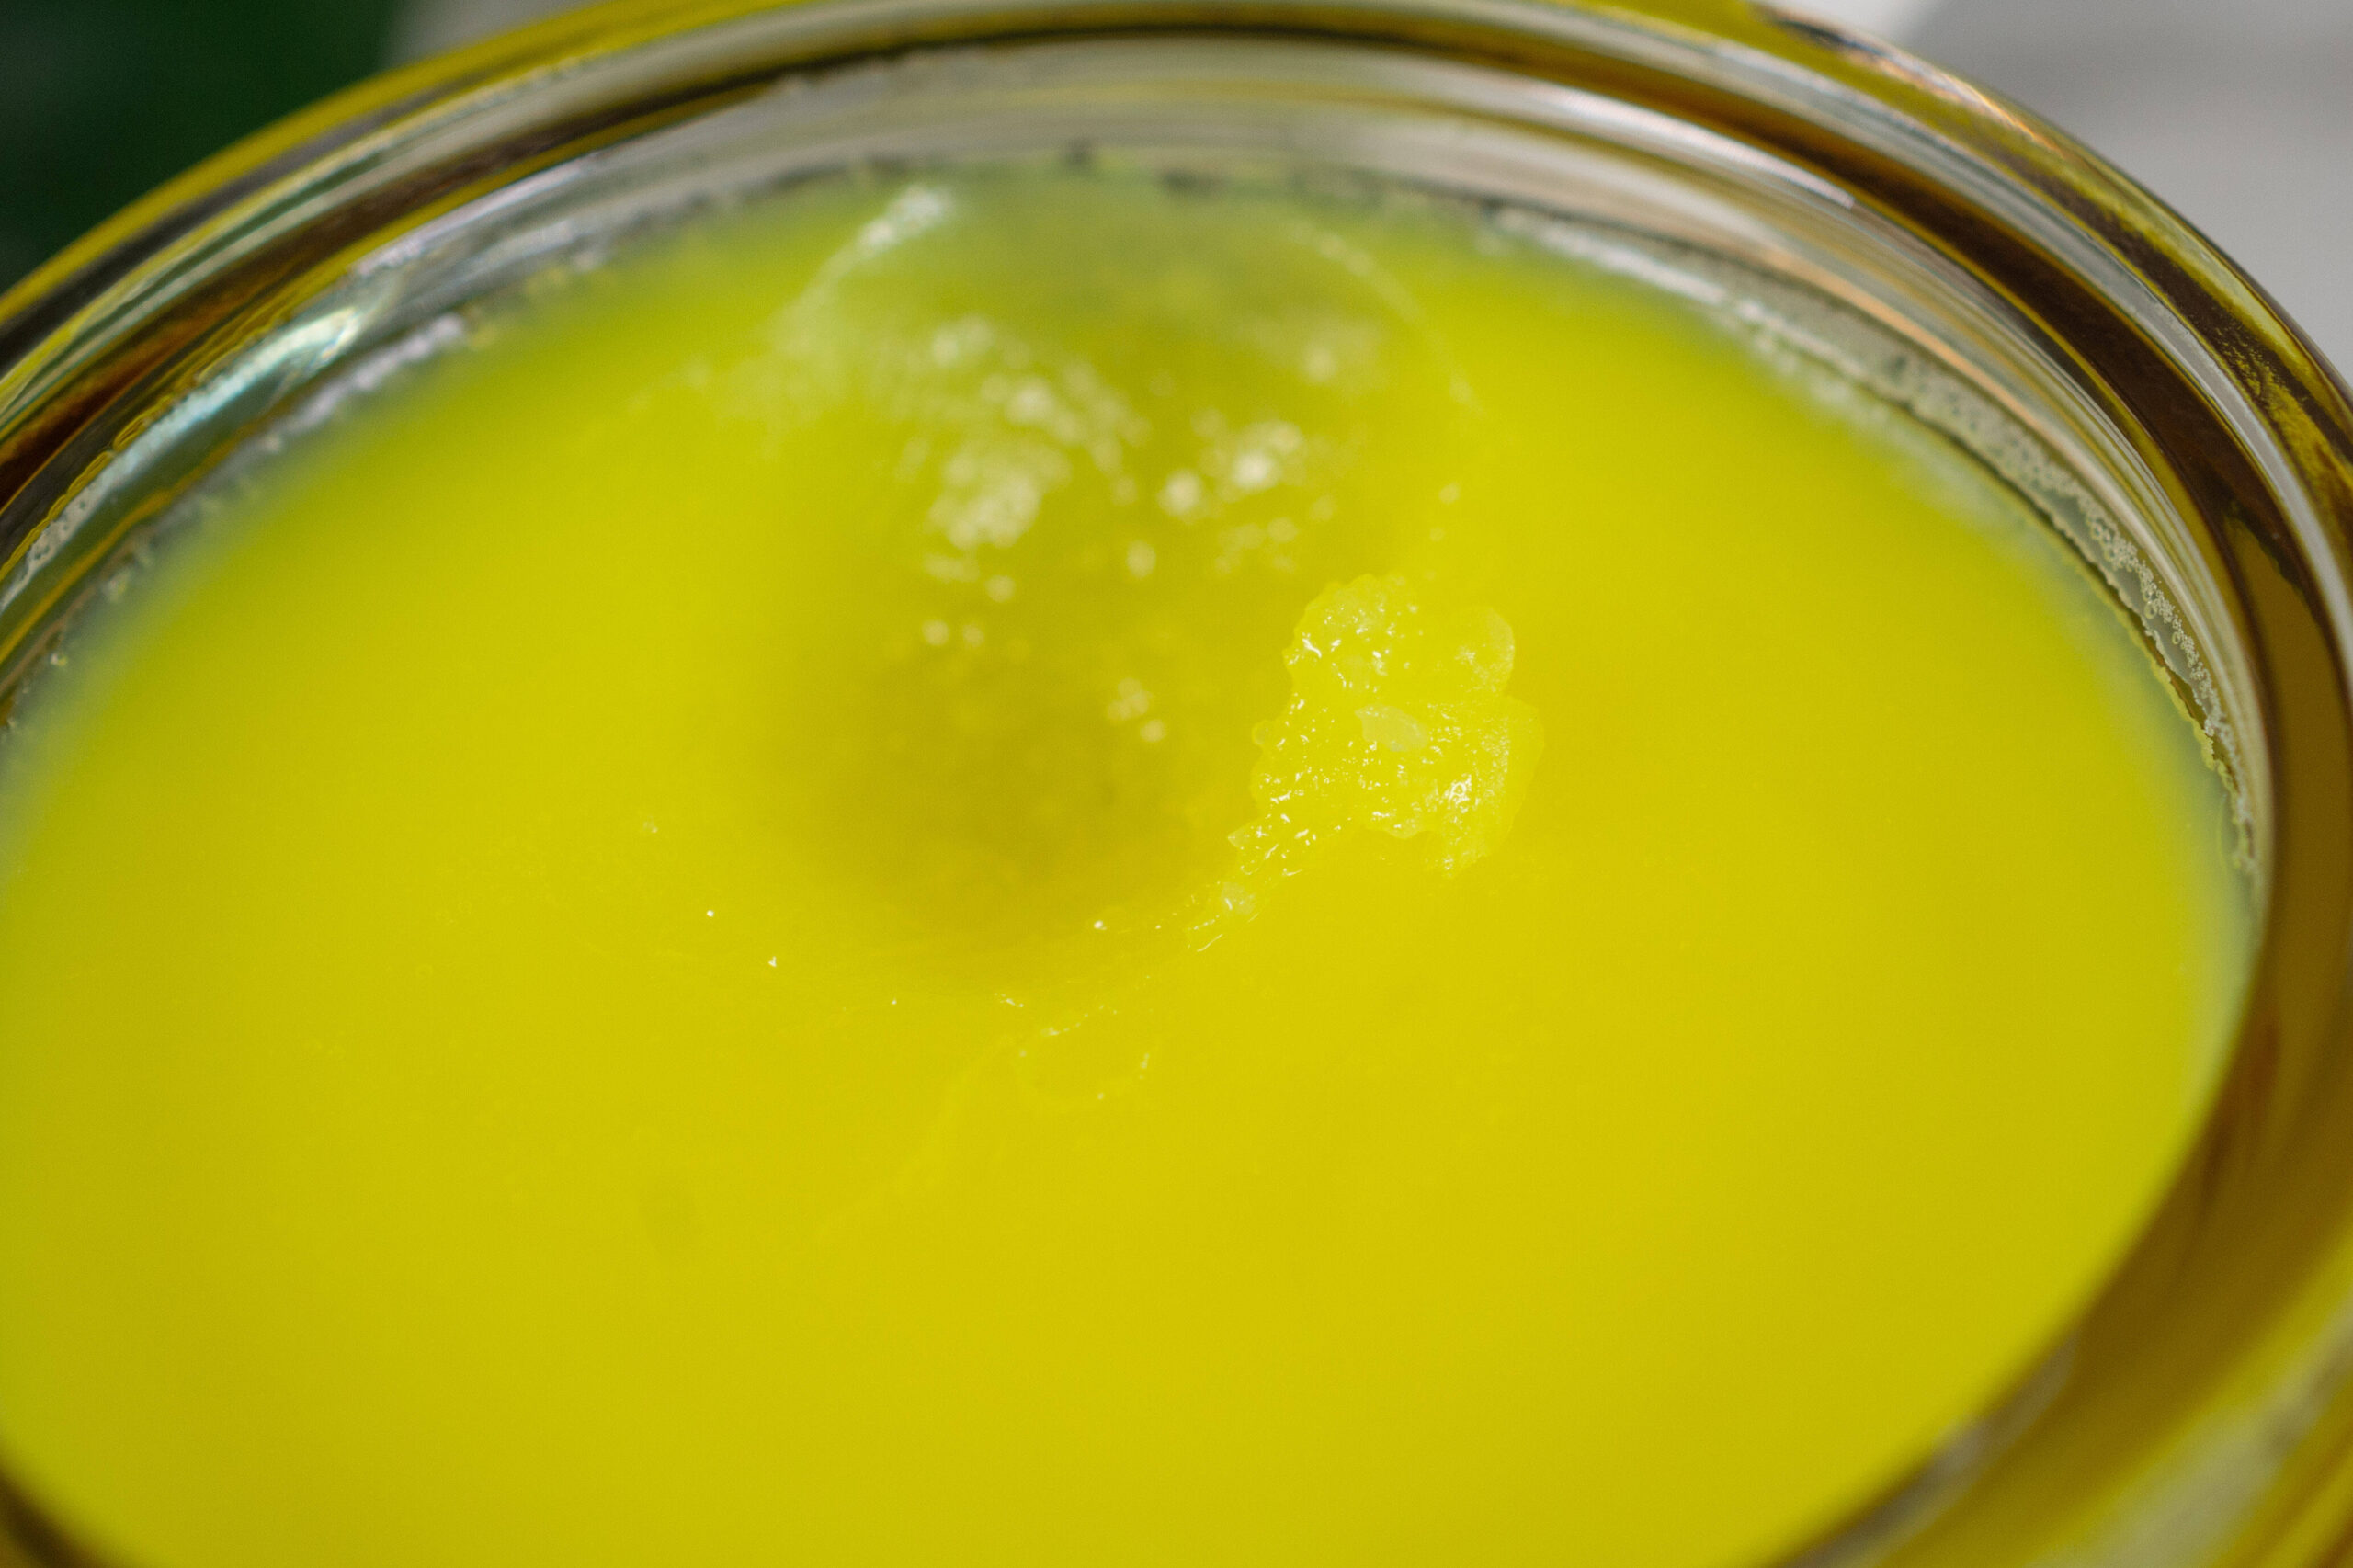 Close up of the True Botanicals Ginger and Turmeric Cleansing Balm, which is neon yellow in the pot